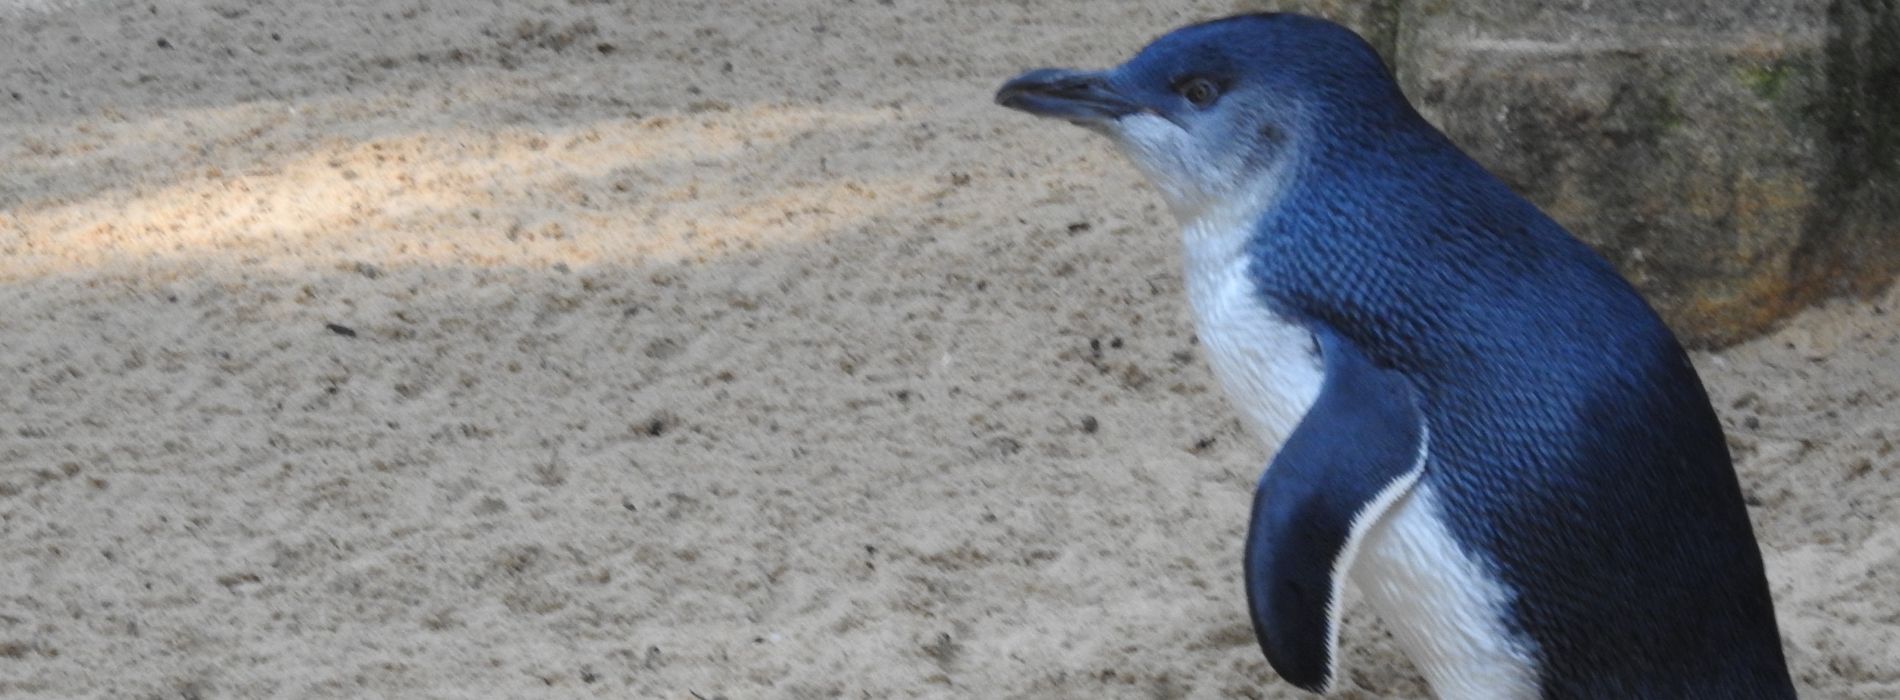 Why are little penguins blue?